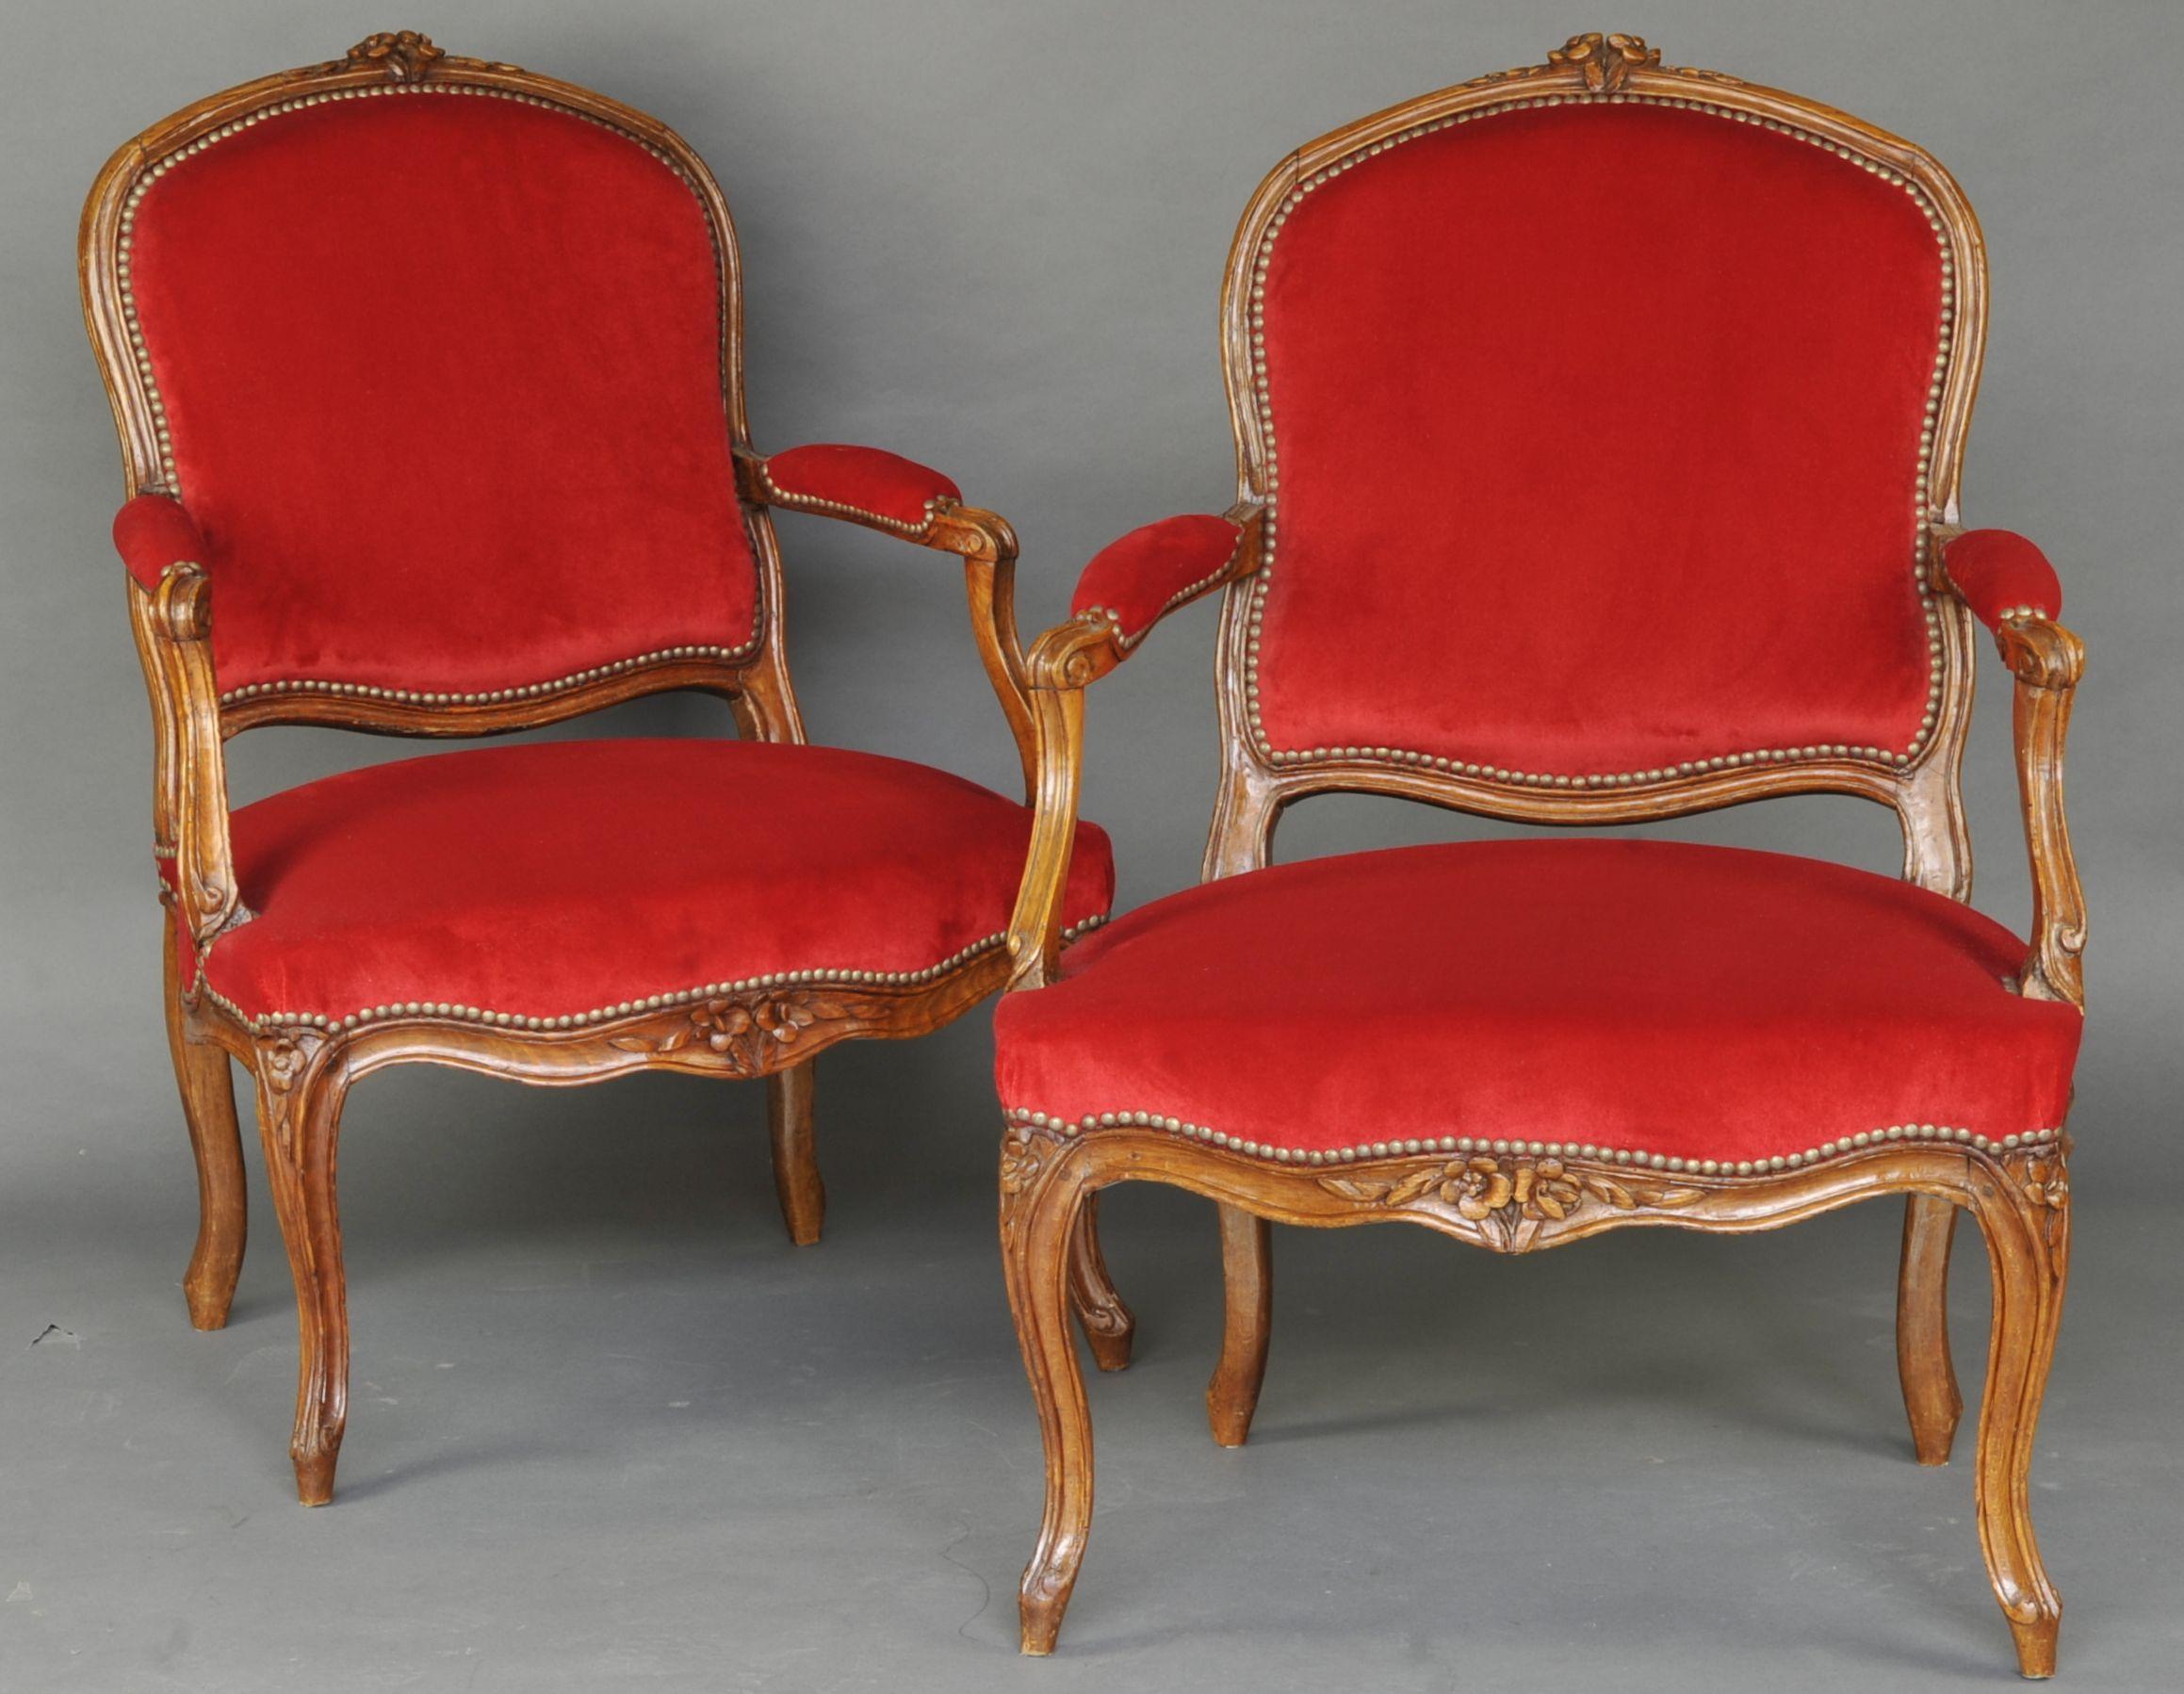 Magnificent pair of Louis XV armchairs in carved beech, queen-style backrests, whip armrests consoles, very elegantly scalloped belts carved with nets and bouquets of flowers.

Very beautiful red velvet fabric from Lelièvre in Paris.

The